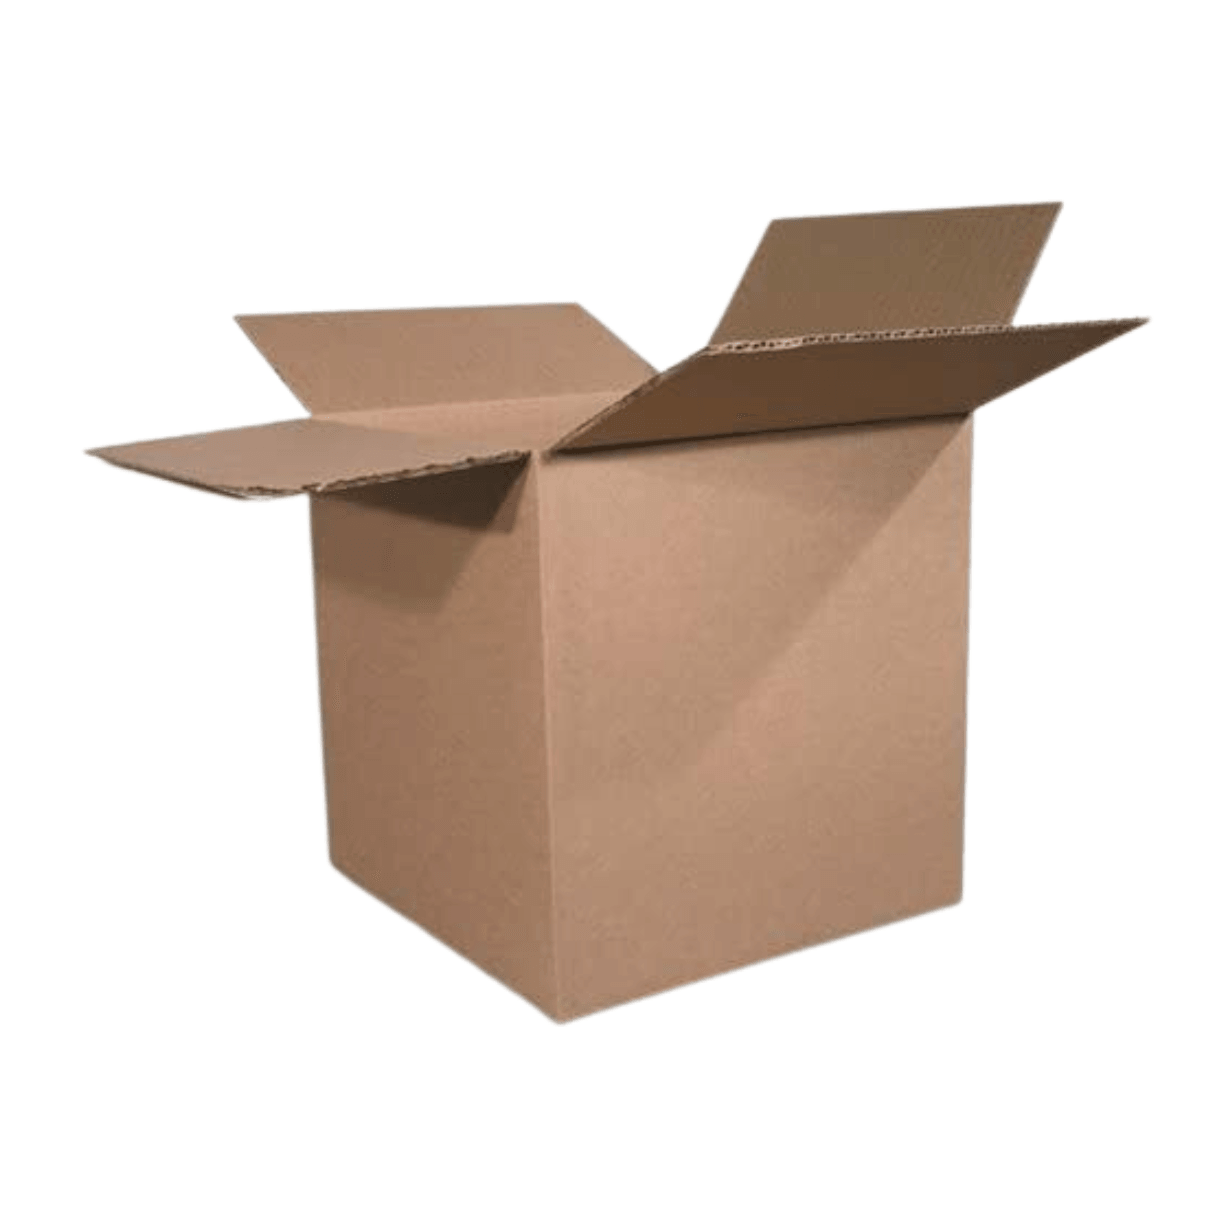 Small Cardboard Shipping Boxes With Lid, Brown Mailers Boxes